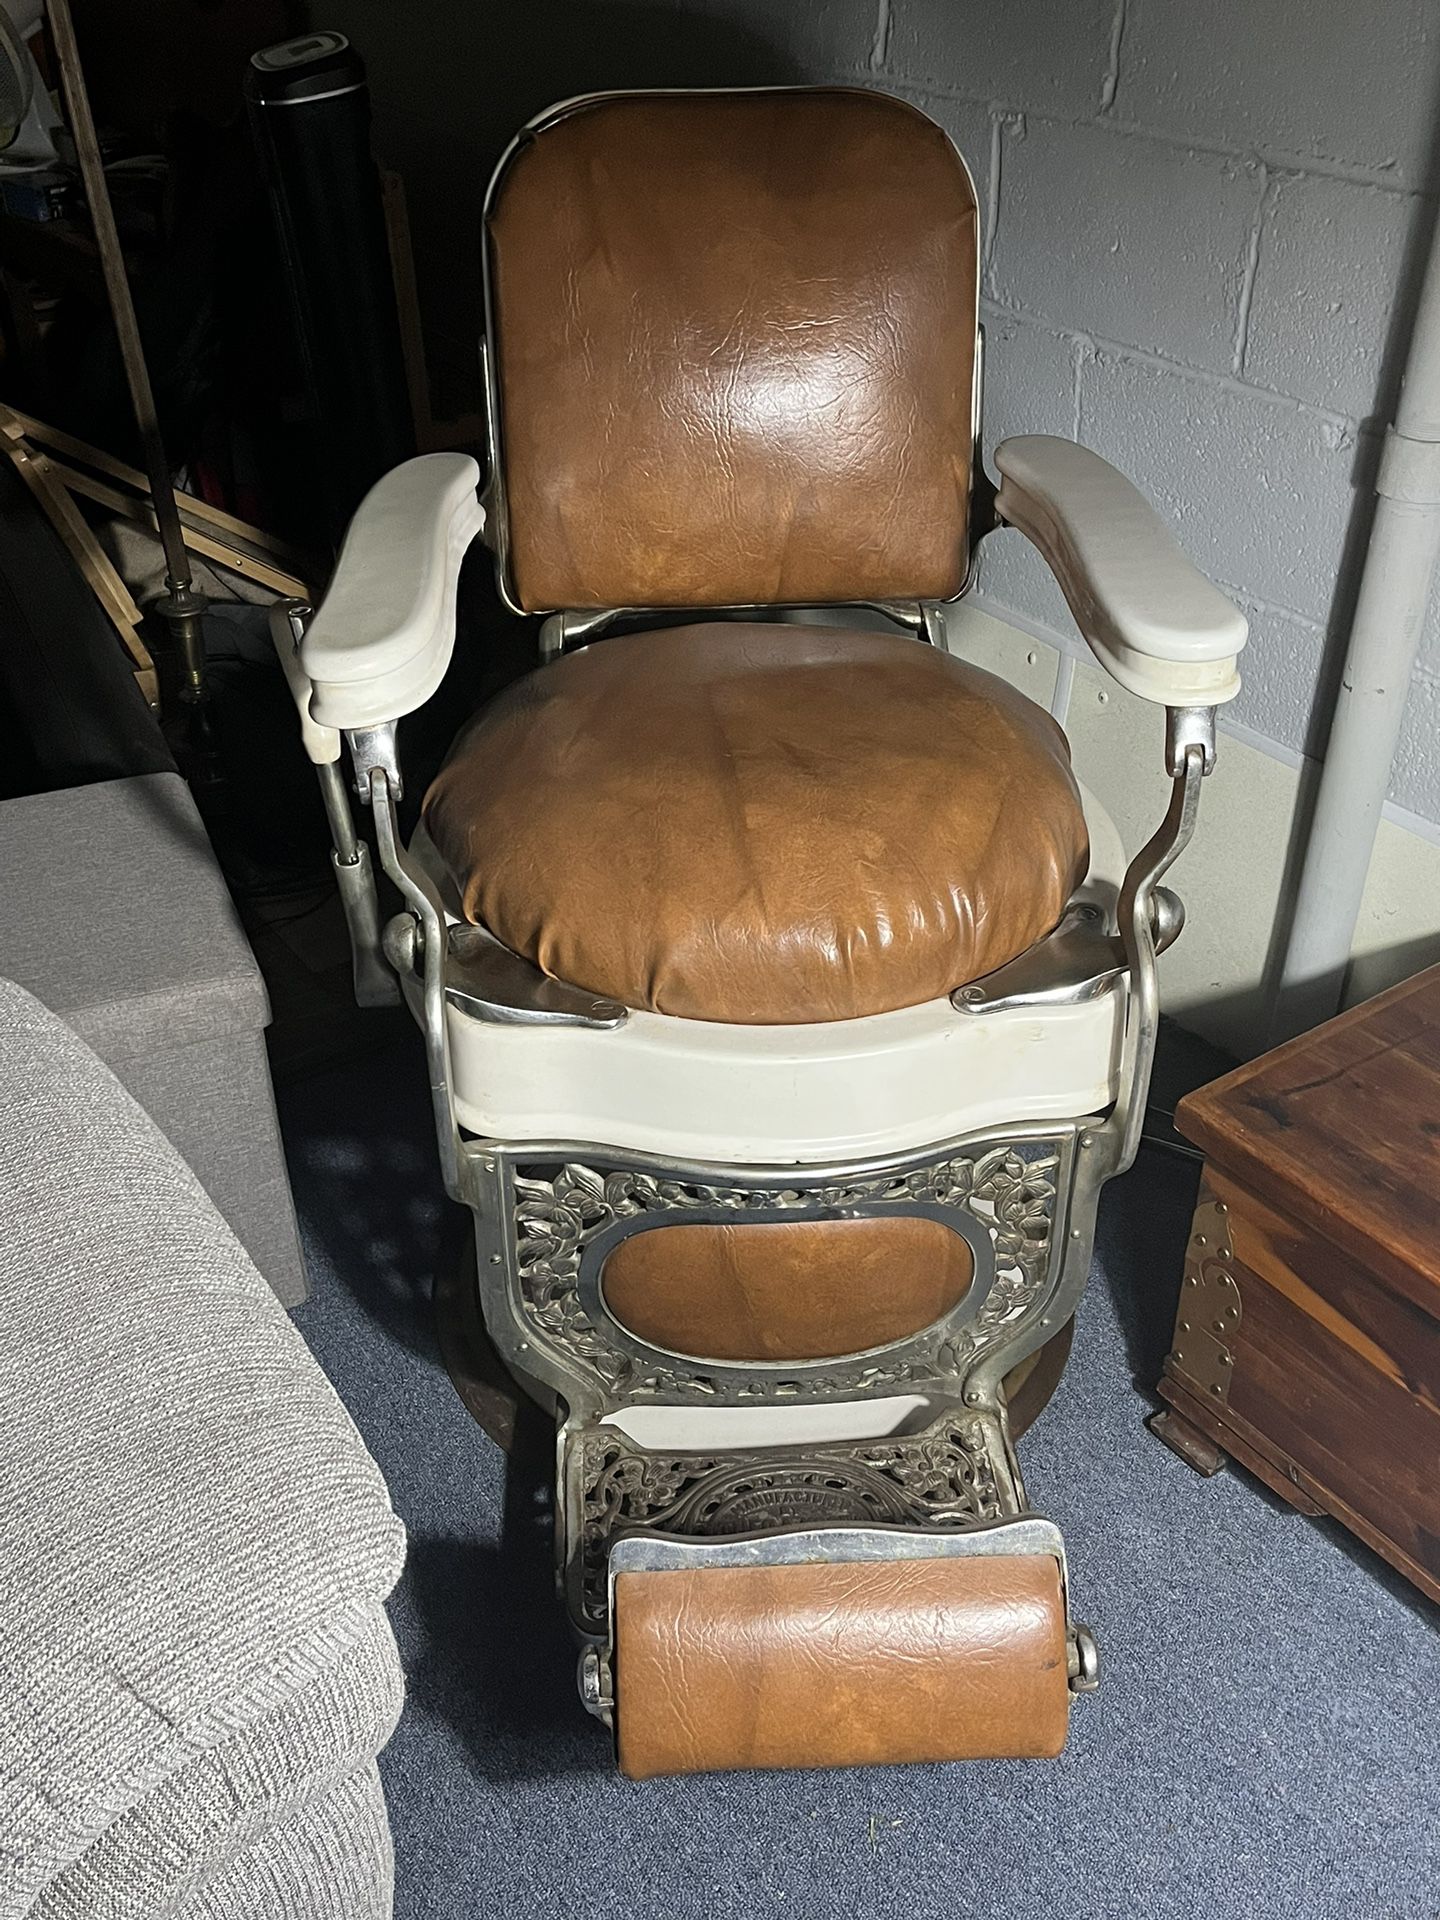 Theo A Koch’s Antique Barber Chair